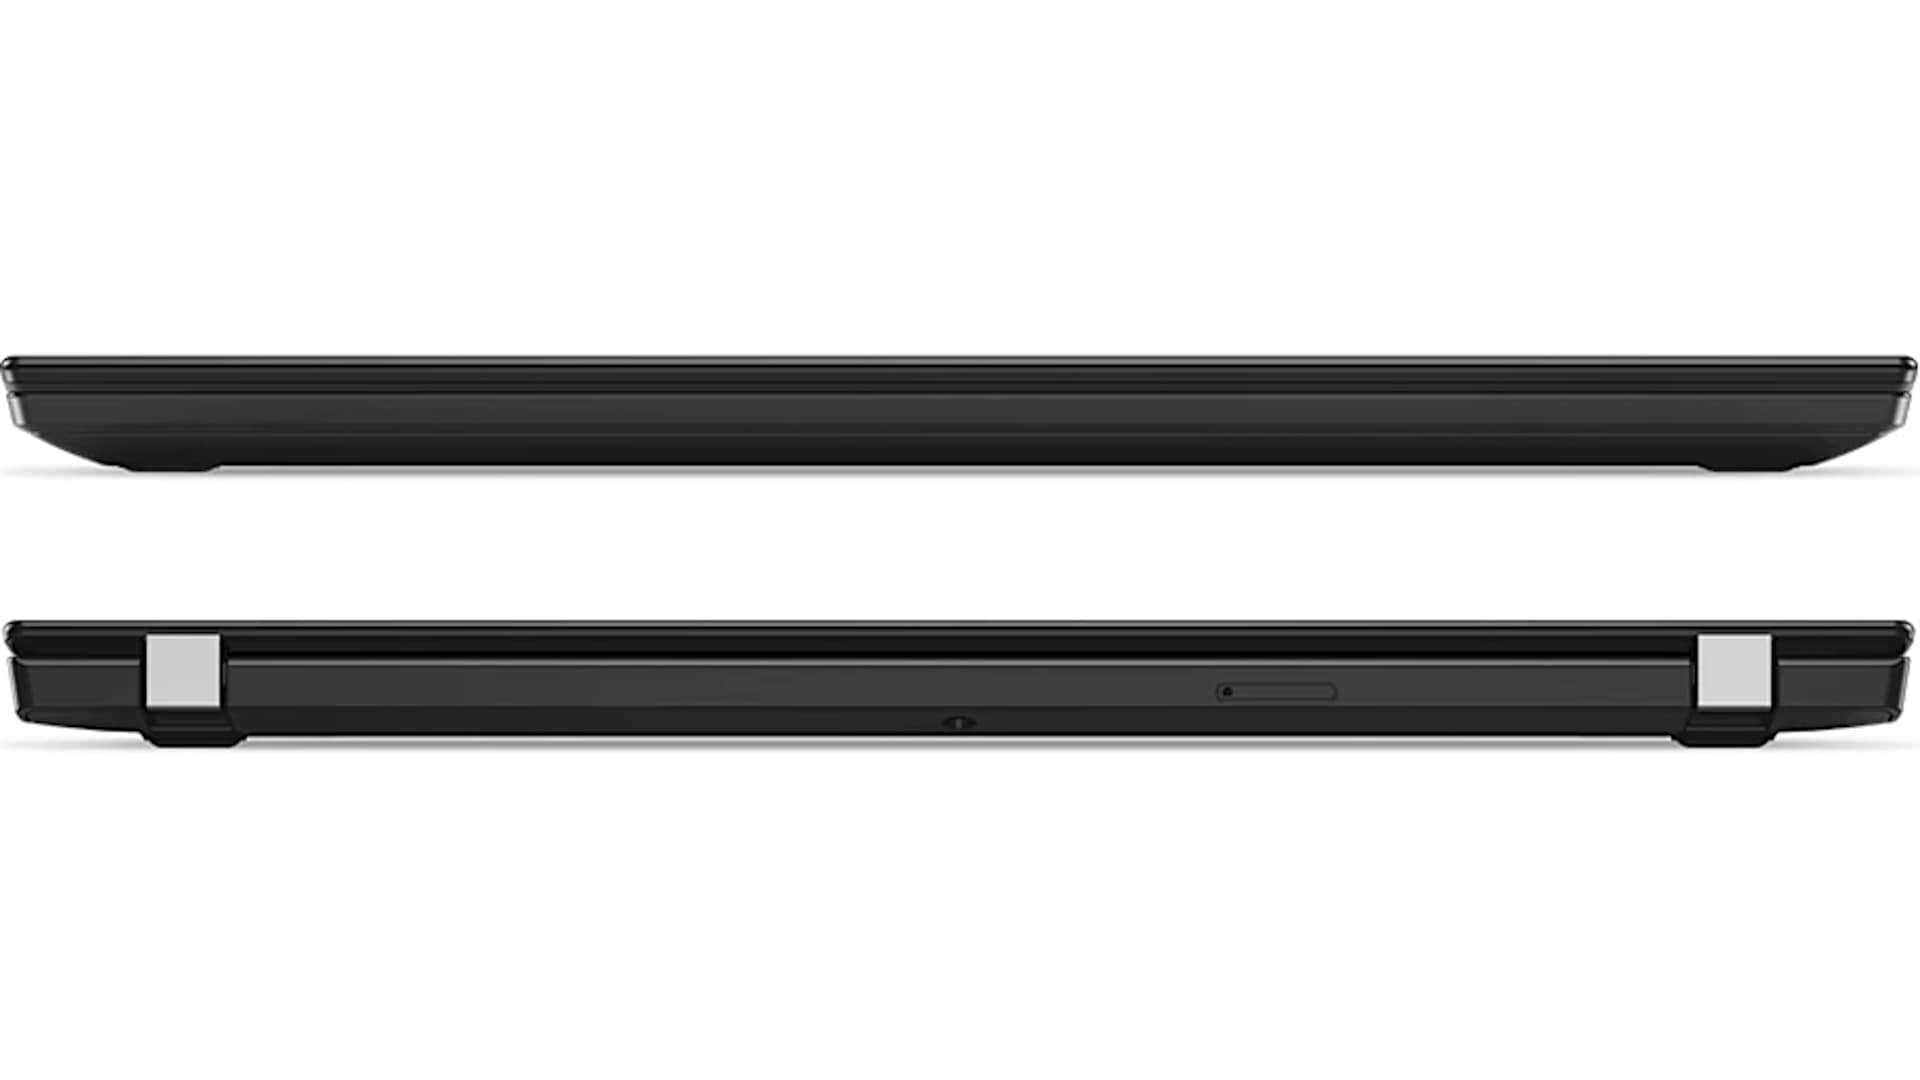 Lenovo ThinkPad X280 Front and Back Sides